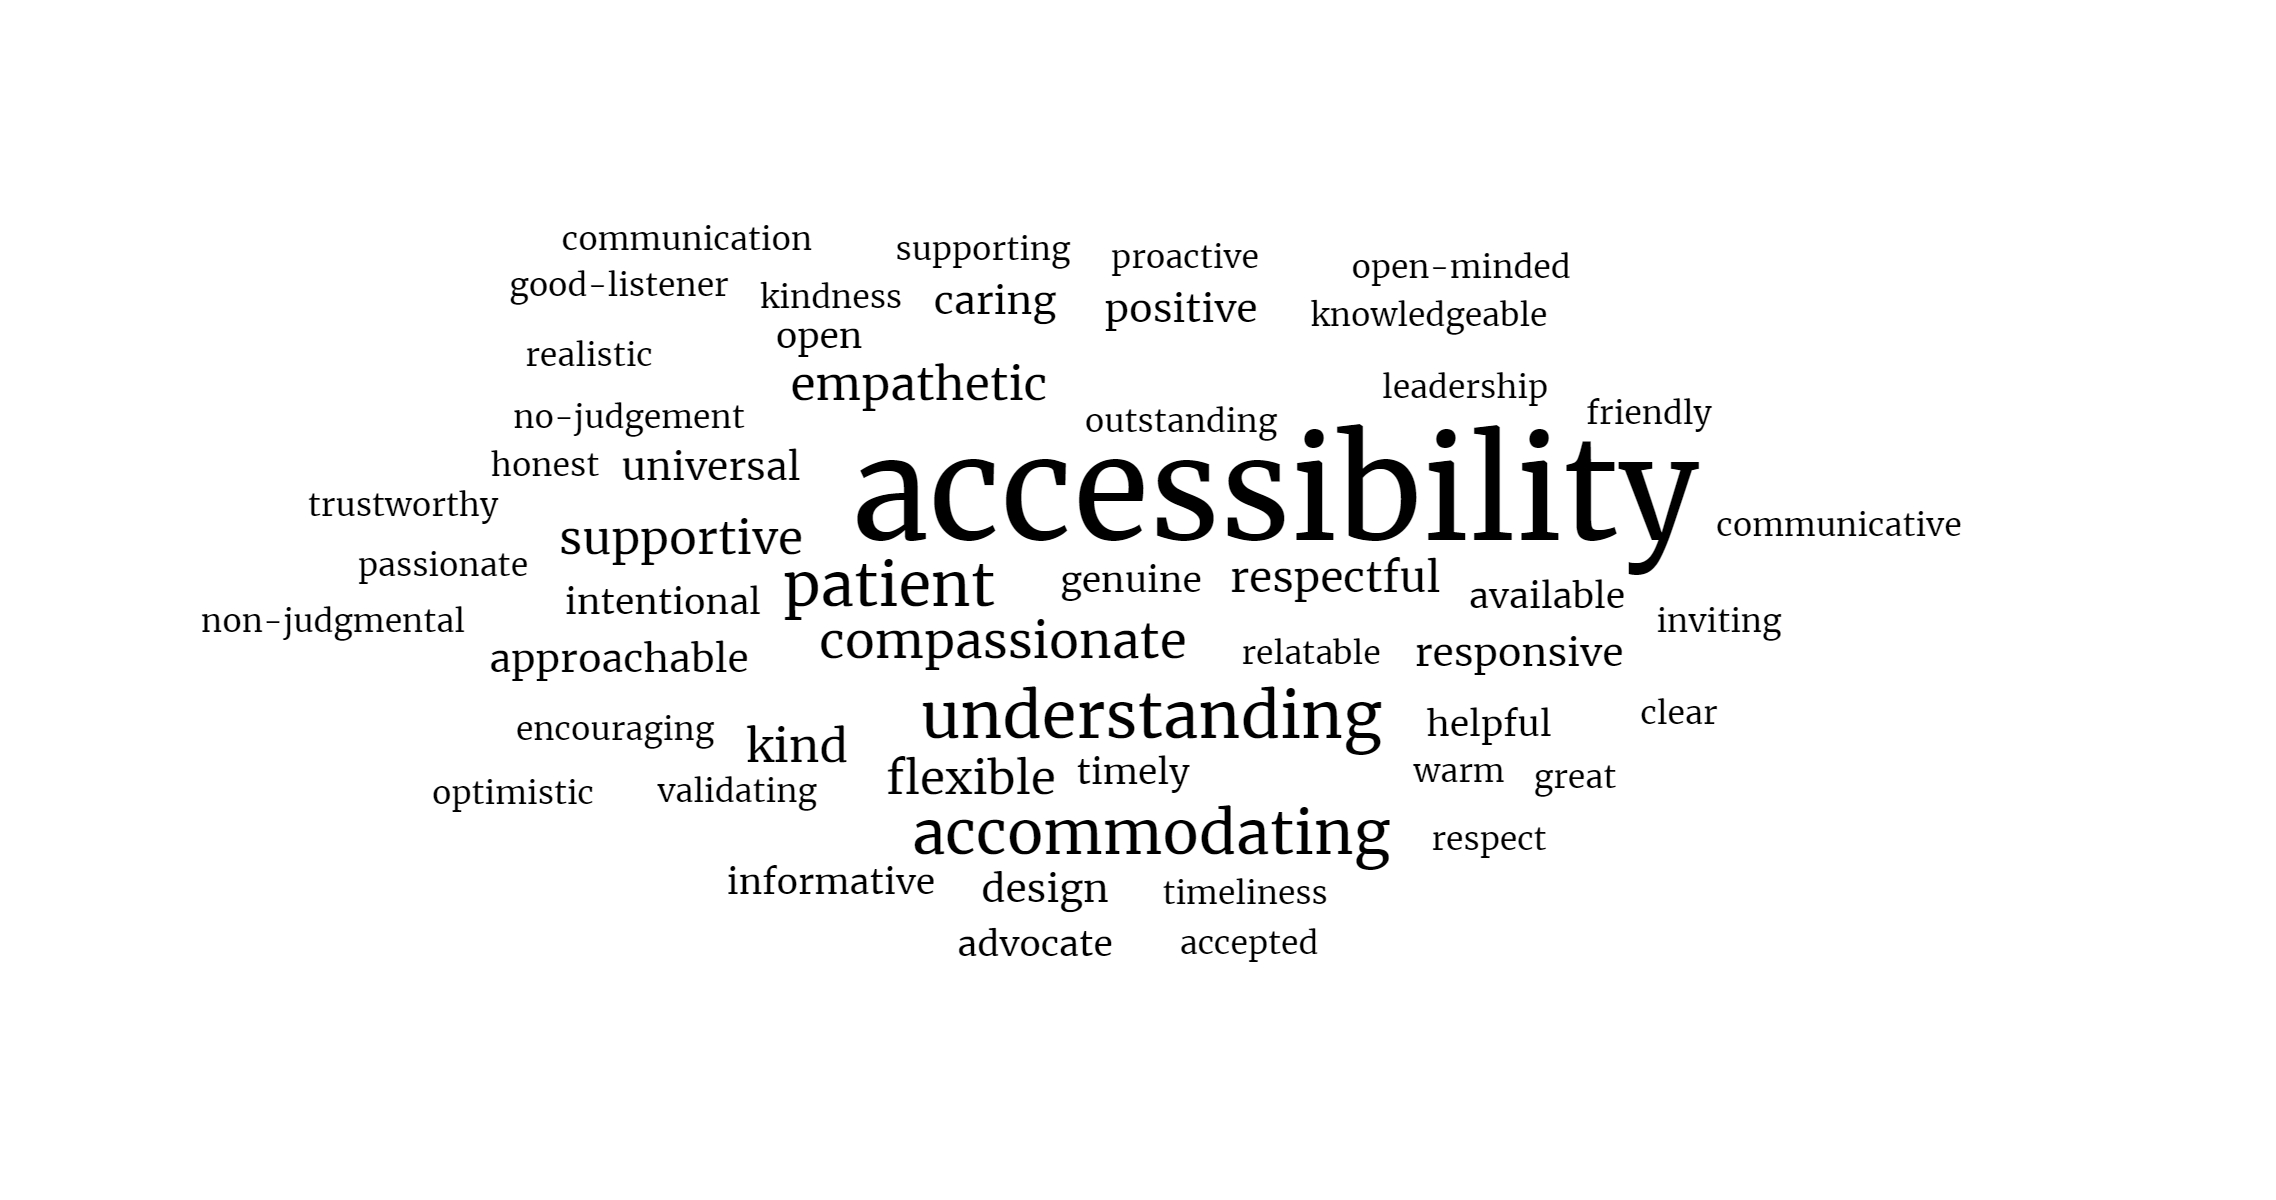 2023 Two Thumbs Up Word Cloud: Accepted, Accessibility, Advocate, Approachable, Available, Communication, Communicative, Compassionate, Design, Empathetic, Encouraging, Flexible, Friendly, Genuine, Good listener, Great, Helpful, Honest, Informative, Intentional, Inviting, Kindness, Kind, Knowledgeable, Leadership, No-Judgement, Open, Open-minded, Optimistic, Outstanding, Passionate, Patient, Positive, Proactive, Realistic, Relatable, Respectful, Respect, Responsive, Supporting, Supportive, Timeliness, Timely, Trustworthy, Understanding, Universal, Validating, Warm